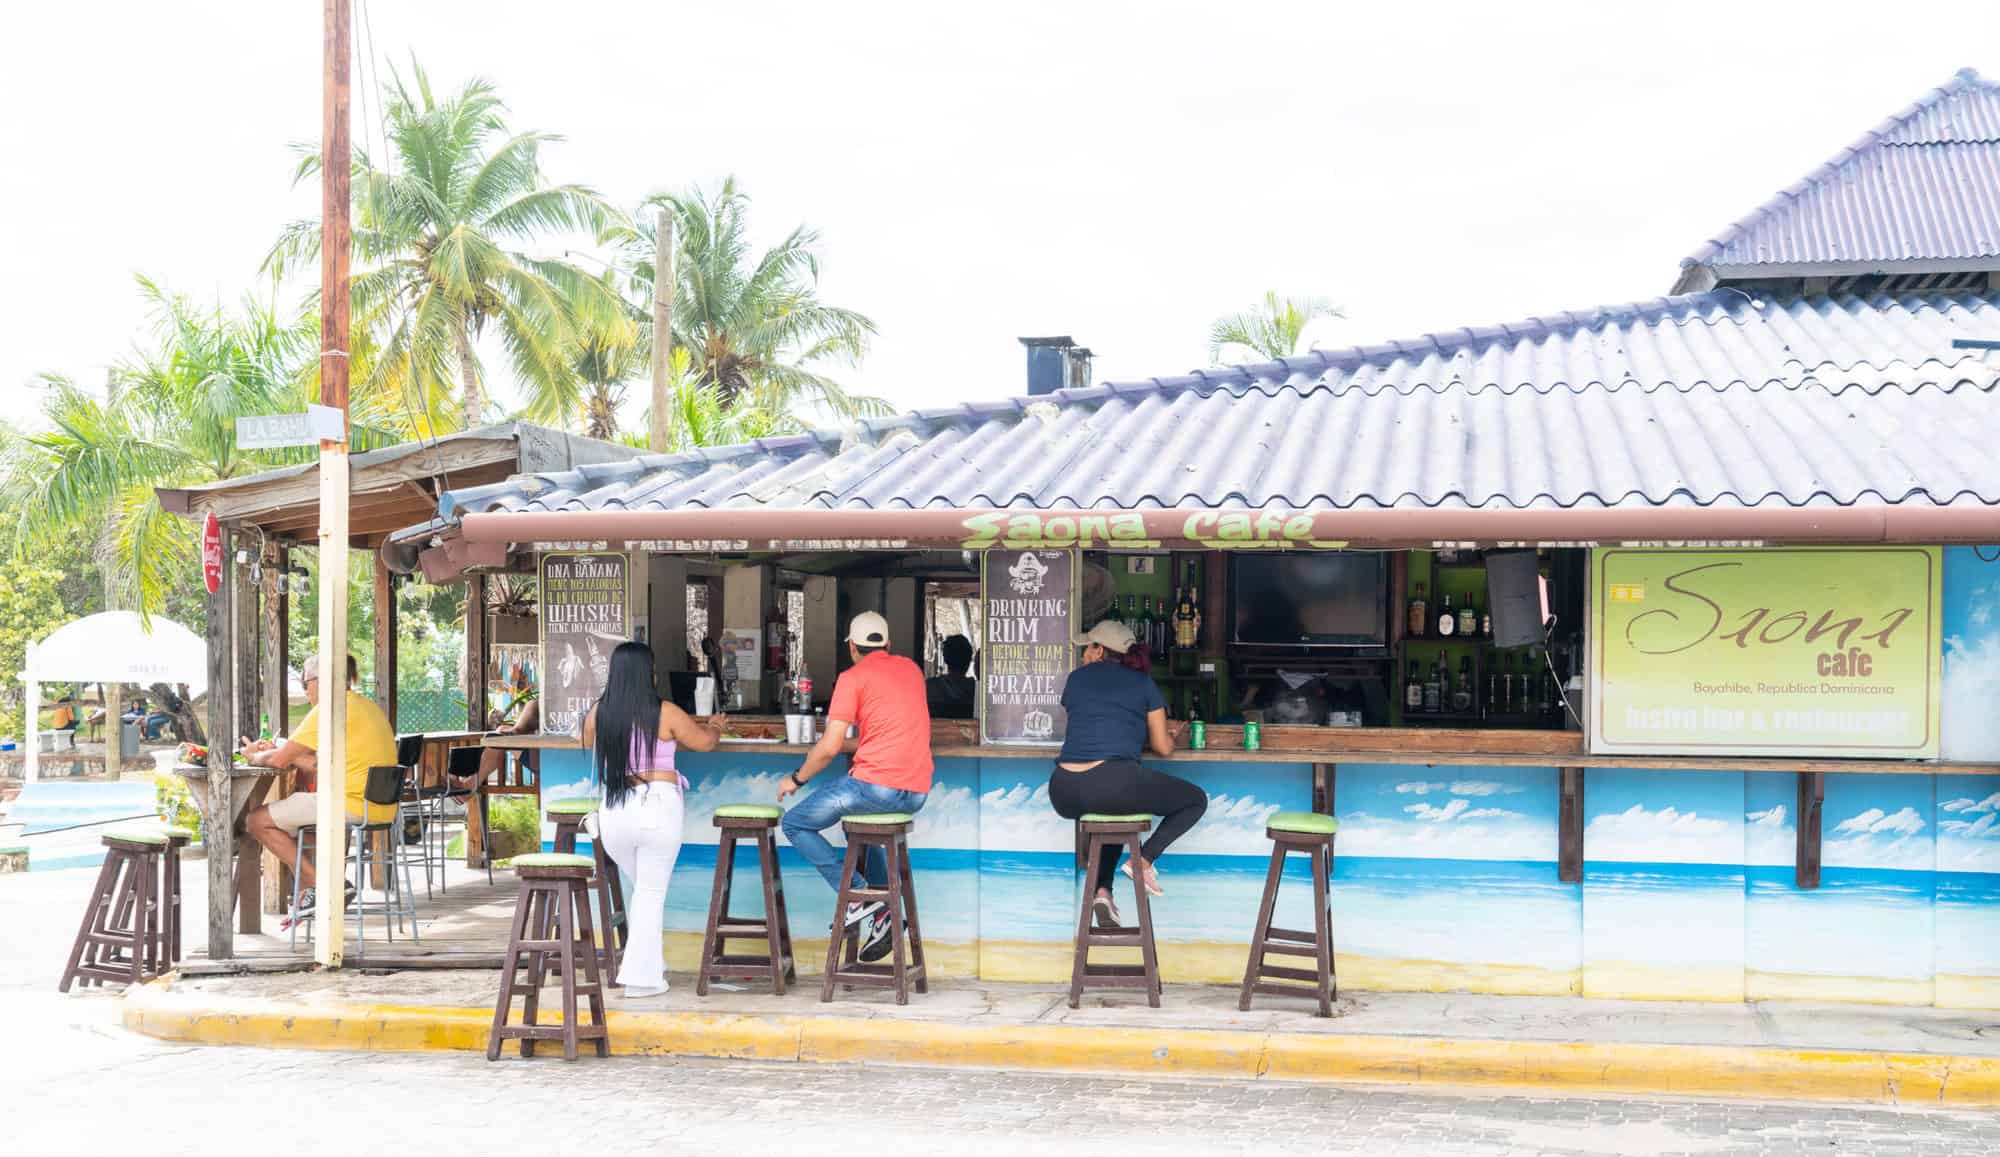 Caribbean - Dominican Republic - what to wear in the Dominican Republic - Casual wear at a bar in Bayahibe